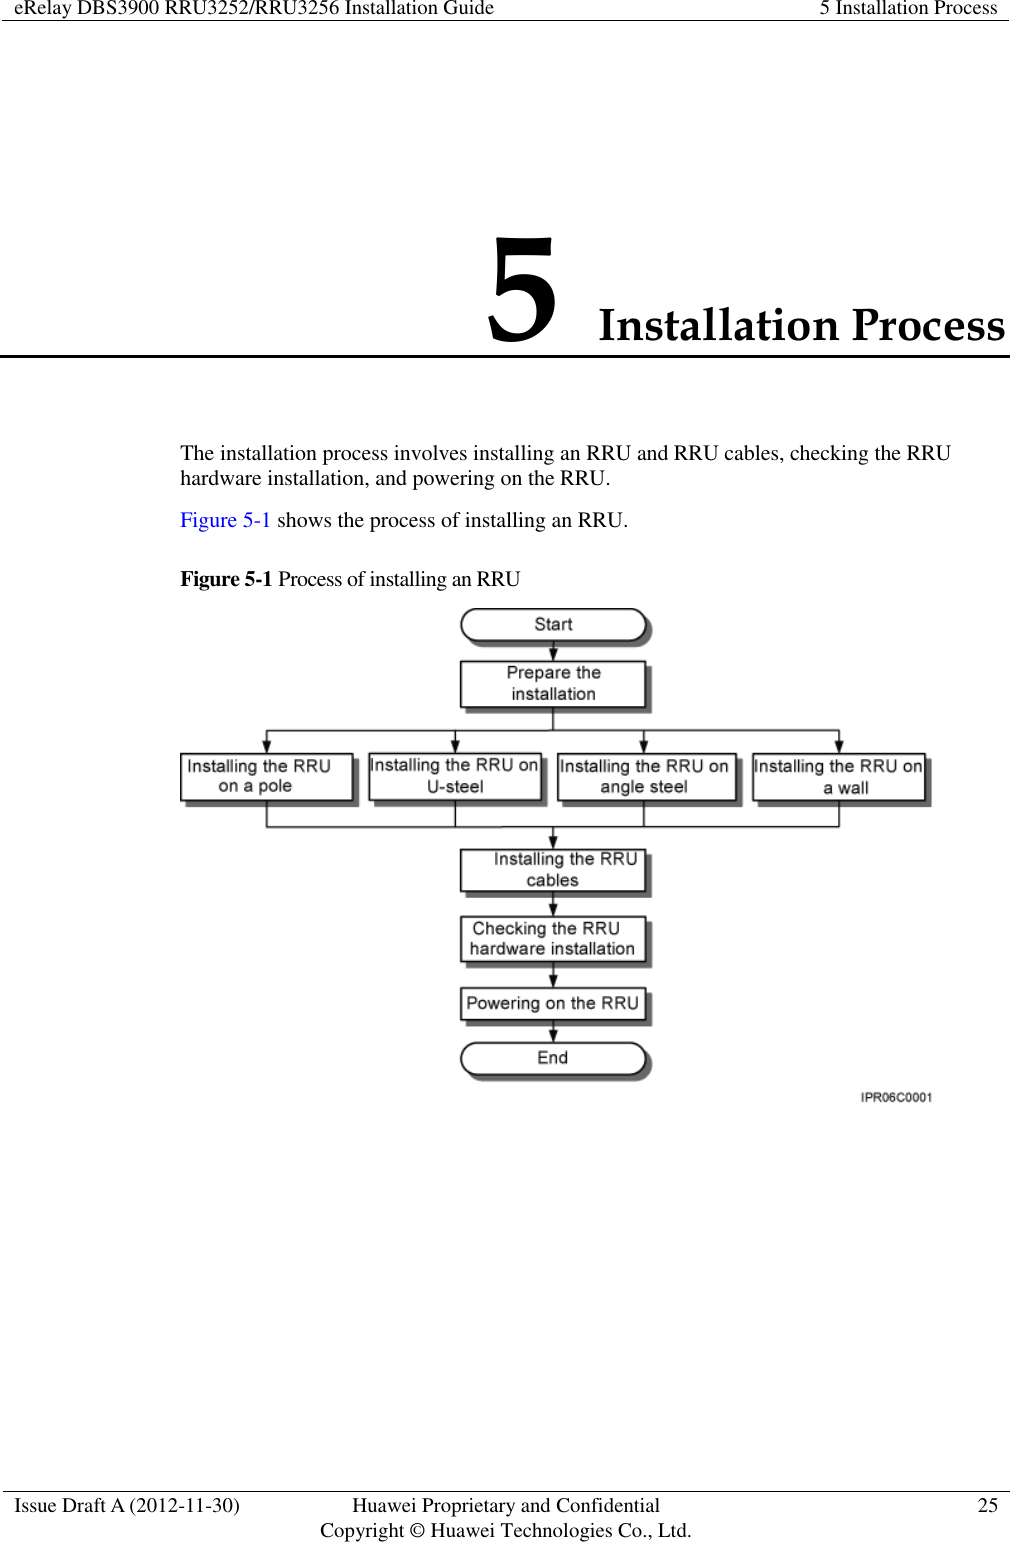 eRelay DBS3900 RRU3252/RRU3256 Installation Guide 5 Installation Process  Issue Draft A (2012-11-30) Huawei Proprietary and Confidential                                     Copyright © Huawei Technologies Co., Ltd. 25  5 Installation Process The installation process involves installing an RRU and RRU cables, checking the RRU hardware installation, and powering on the RRU. Figure 5-1 shows the process of installing an RRU. Figure 5-1 Process of installing an RRU  